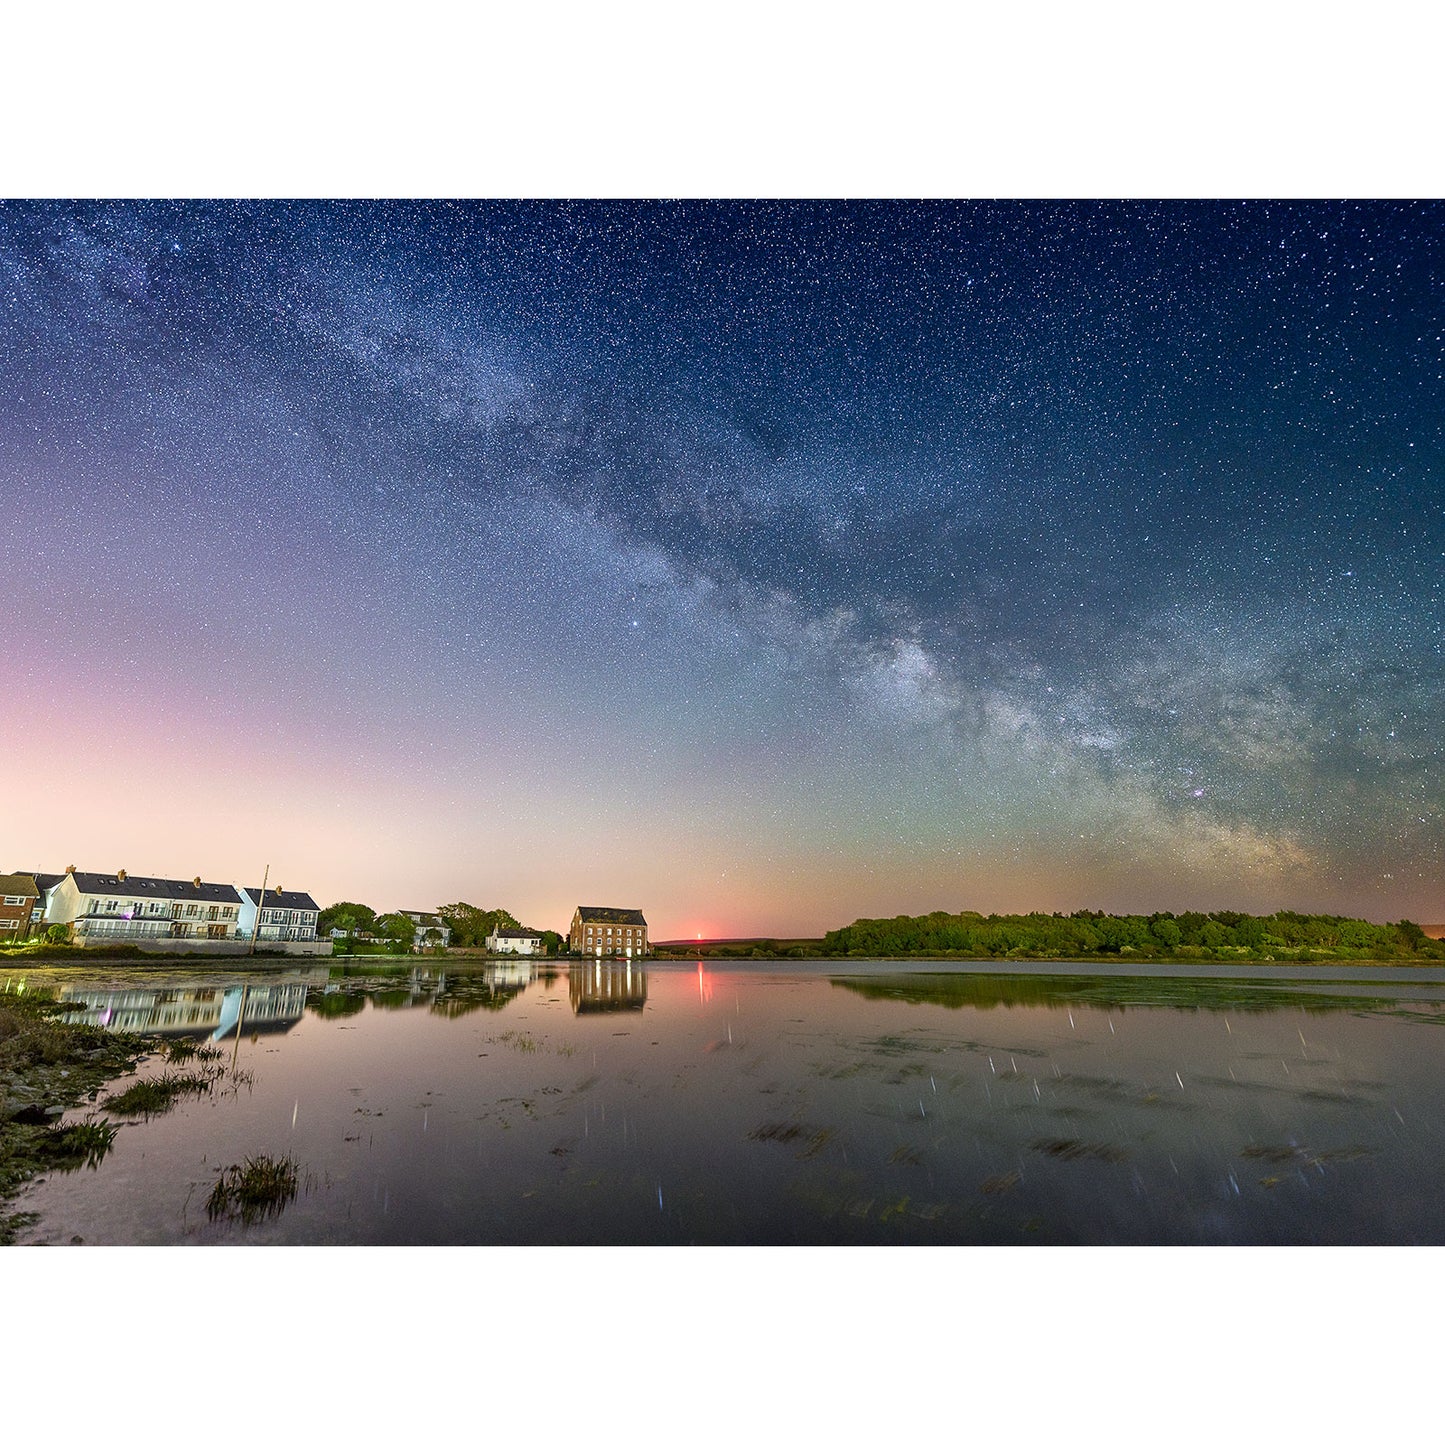 Milky Way over The Old Mill - Available Light Photography